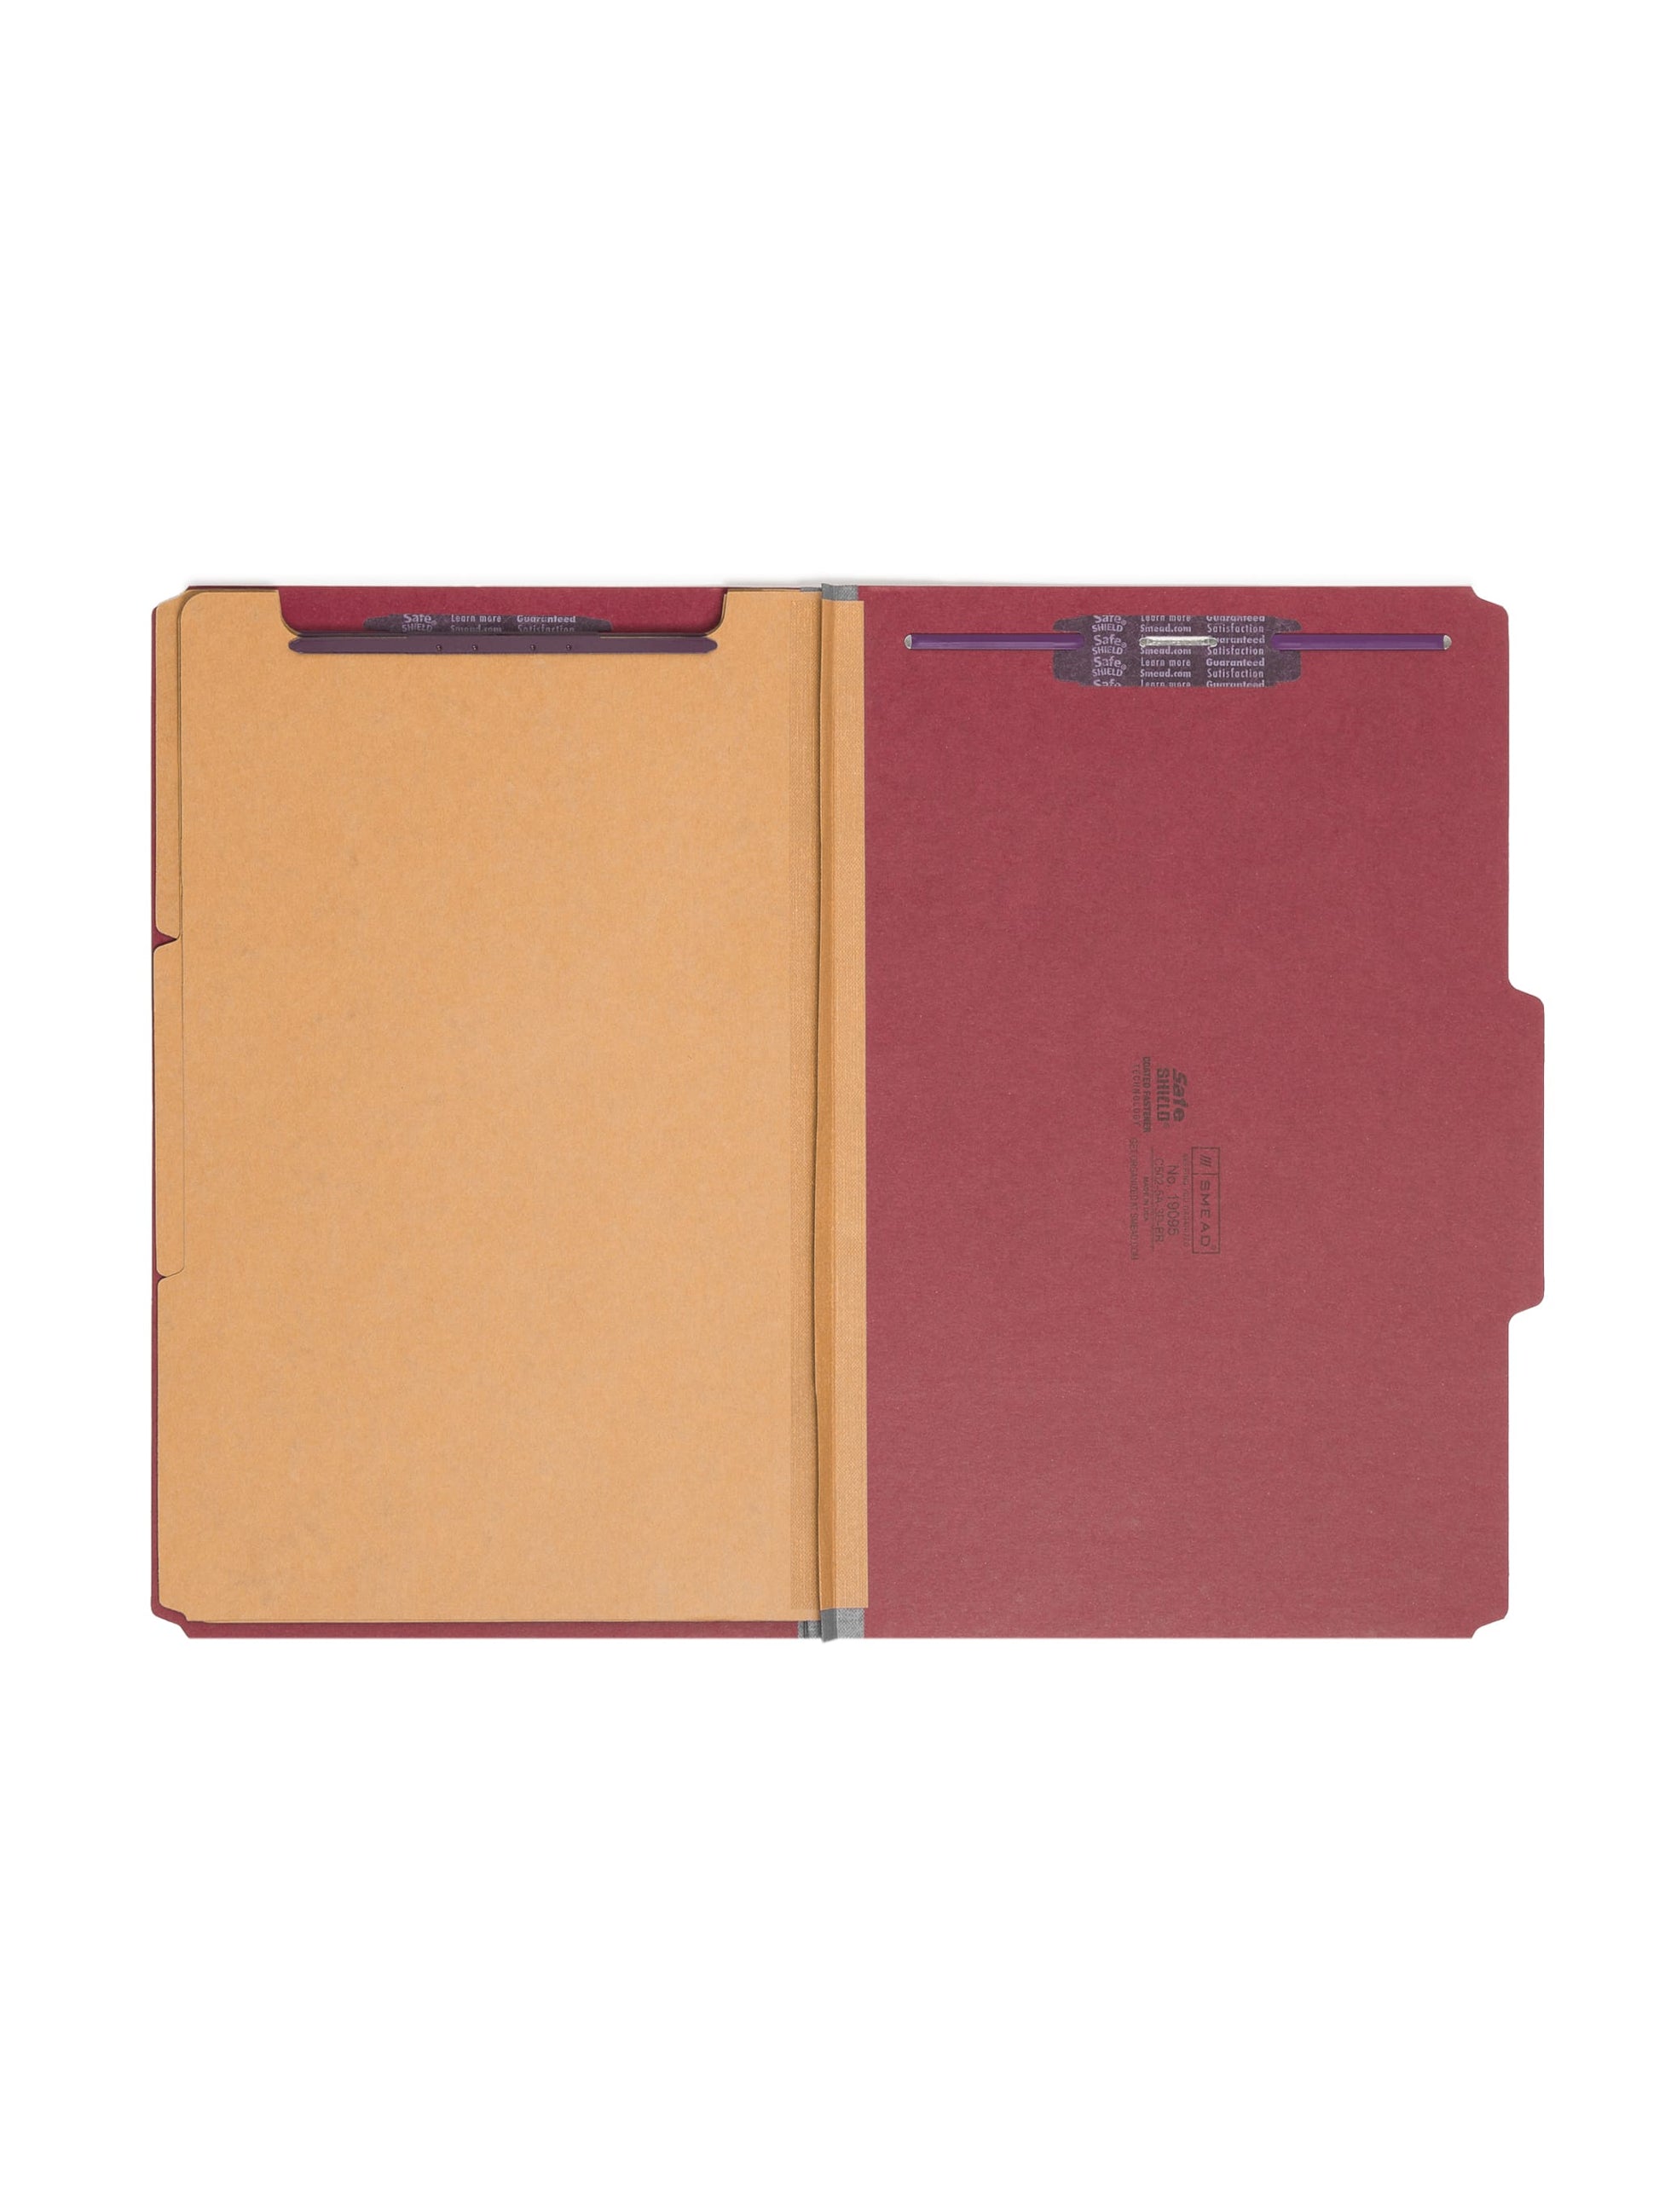 SafeSHIELD® Pressboard Classification File Folders, 3 Dividers, 3 inch Expansion, 2/5-Cut Tab, Bright Red Color, Legal Size, Set of 0, 30086486190955